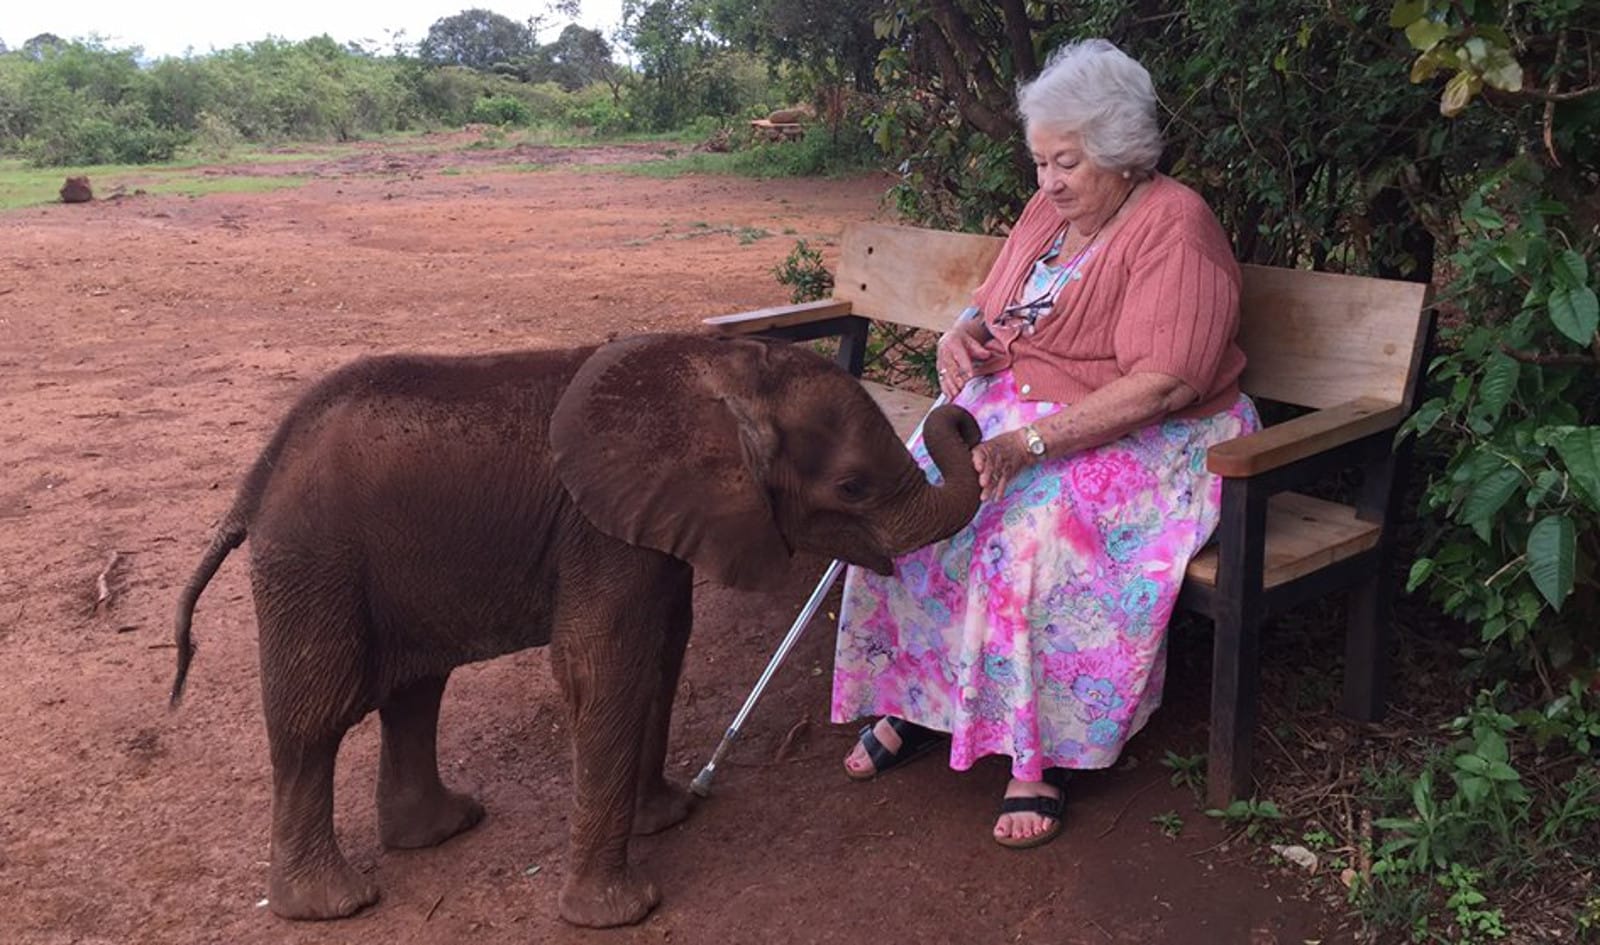 Meet the Amazing 81-Year-Old Conservationist Who's Saving Africa's Last Elephants